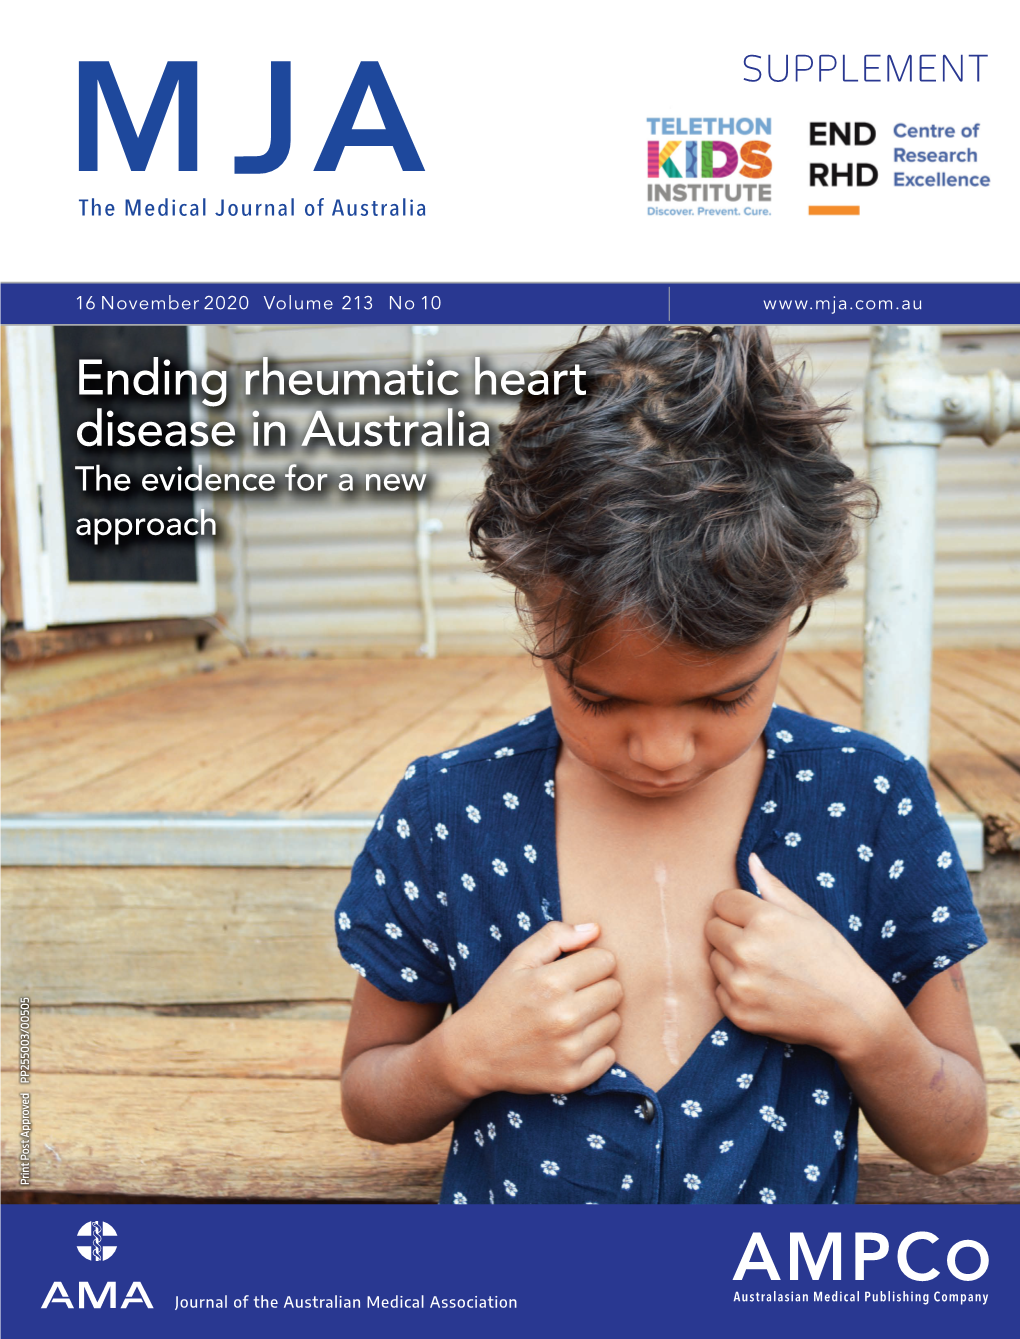 Ending Rheumatic Heart Disease in Australia: the Evidence for a New Approach